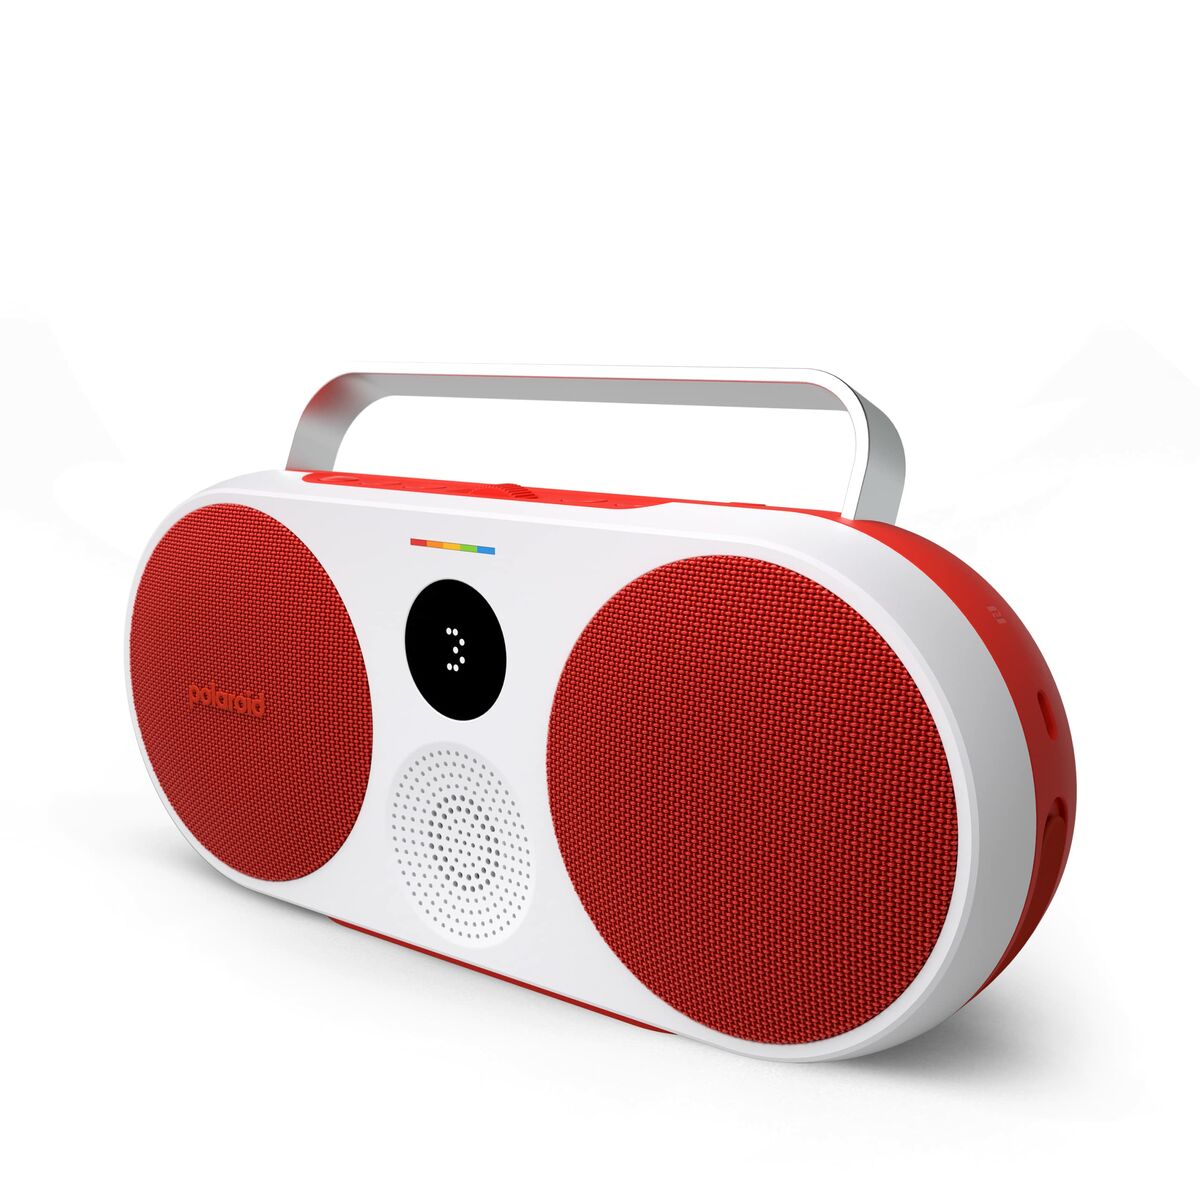 Portable Bluetooth Speakers Polaroid P3 Red, Polaroid, Electronics, Mobile communication and accessories, portable-bluetooth-speakers-polaroid-p3-red, Brand_Polaroid, category-reference-2609, category-reference-2882, category-reference-2923, category-reference-t-19653, category-reference-t-21311, category-reference-t-4036, category-reference-t-4037, Condition_NEW, entertainment, music, Price_200 - 300, RiotNook